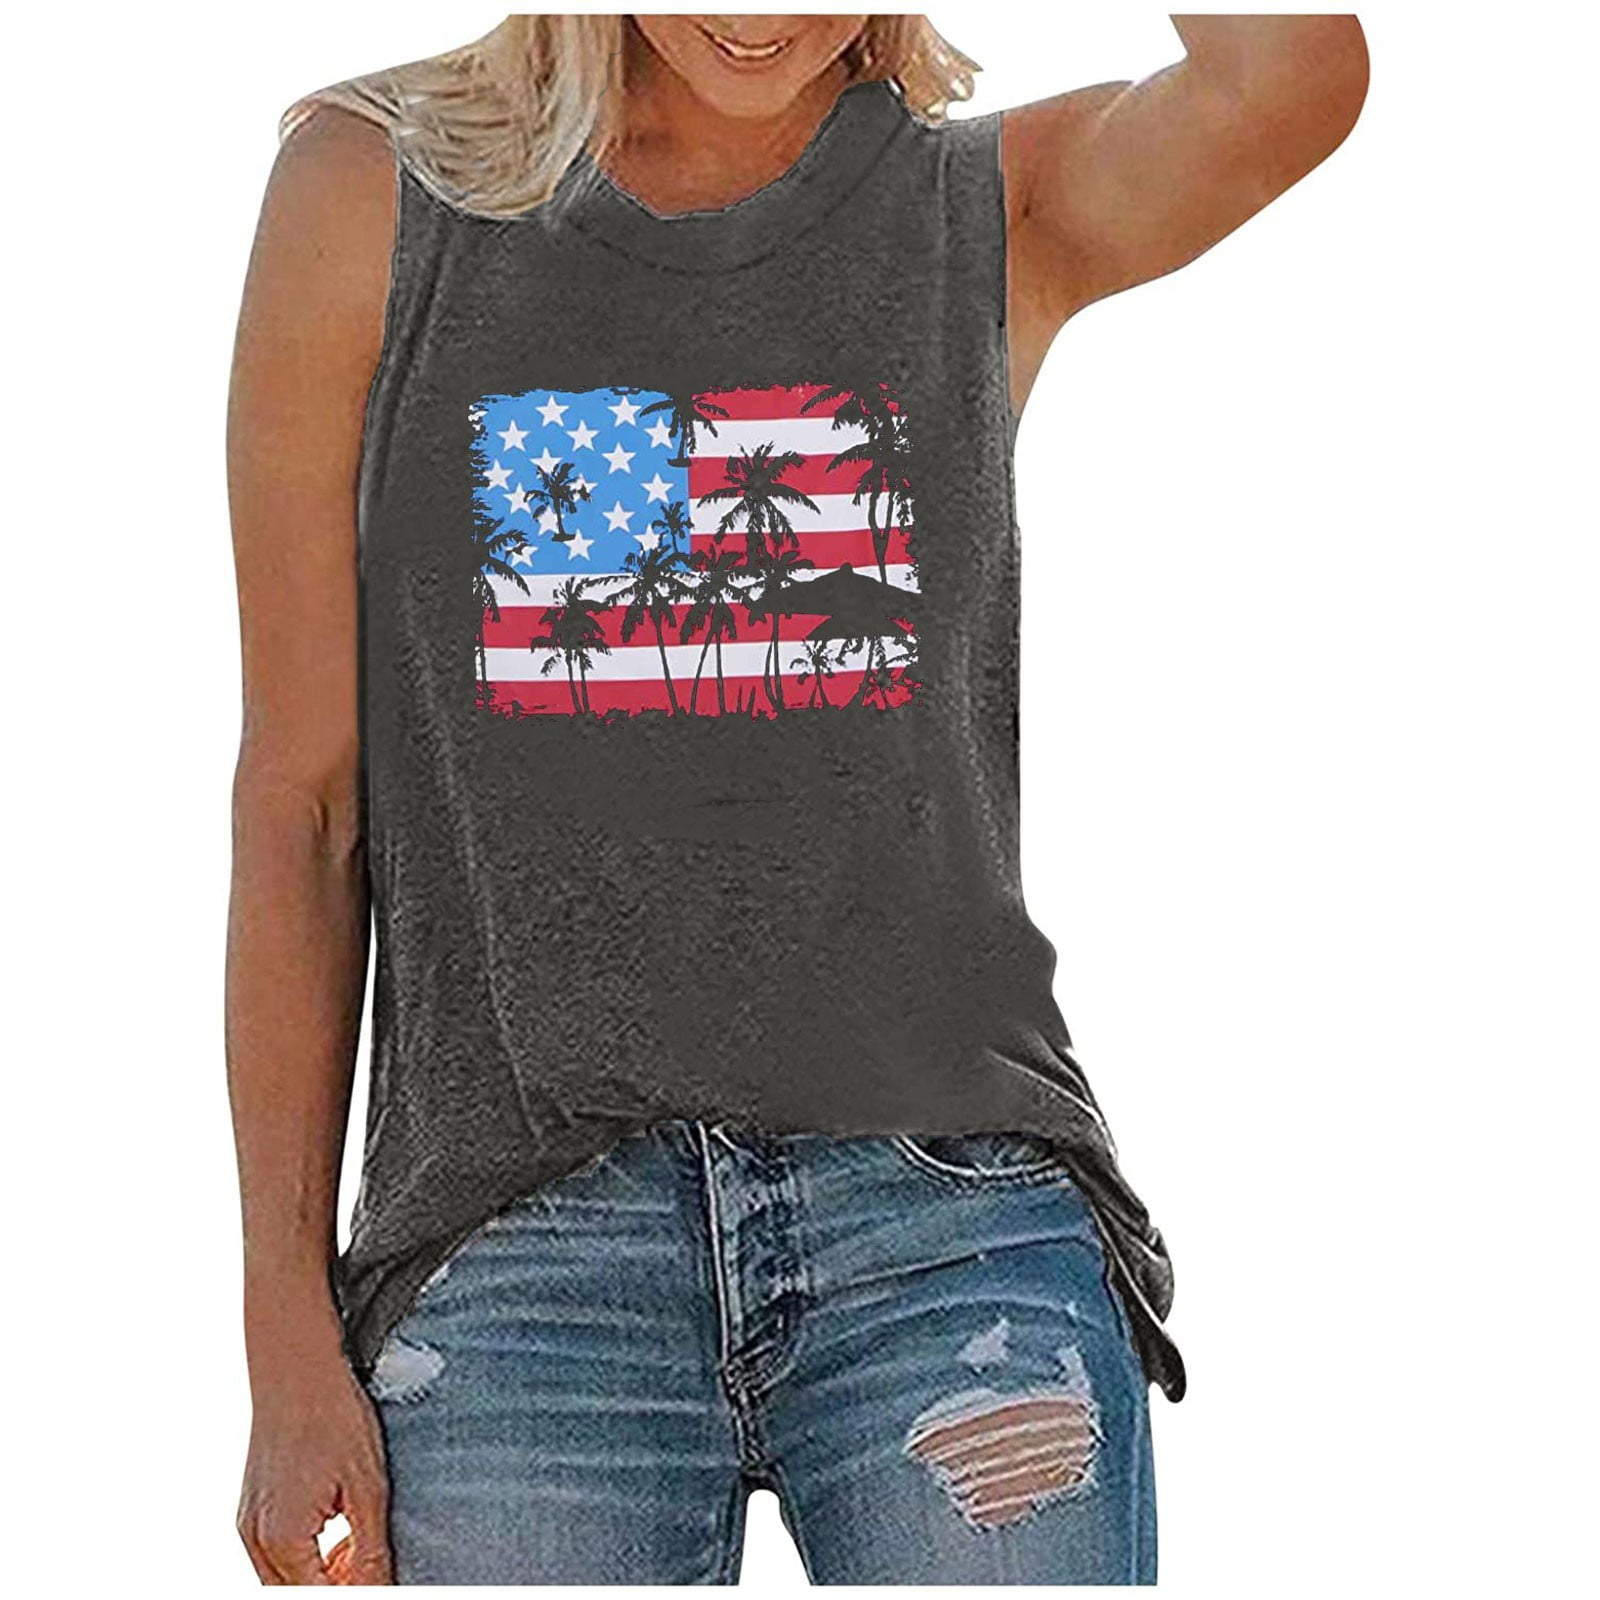 Short Sleeve Tops for Women Summer Tshirts American Flag 4th of July Shirts Sunflower Tee Strappy Cold Shoulder Tops 